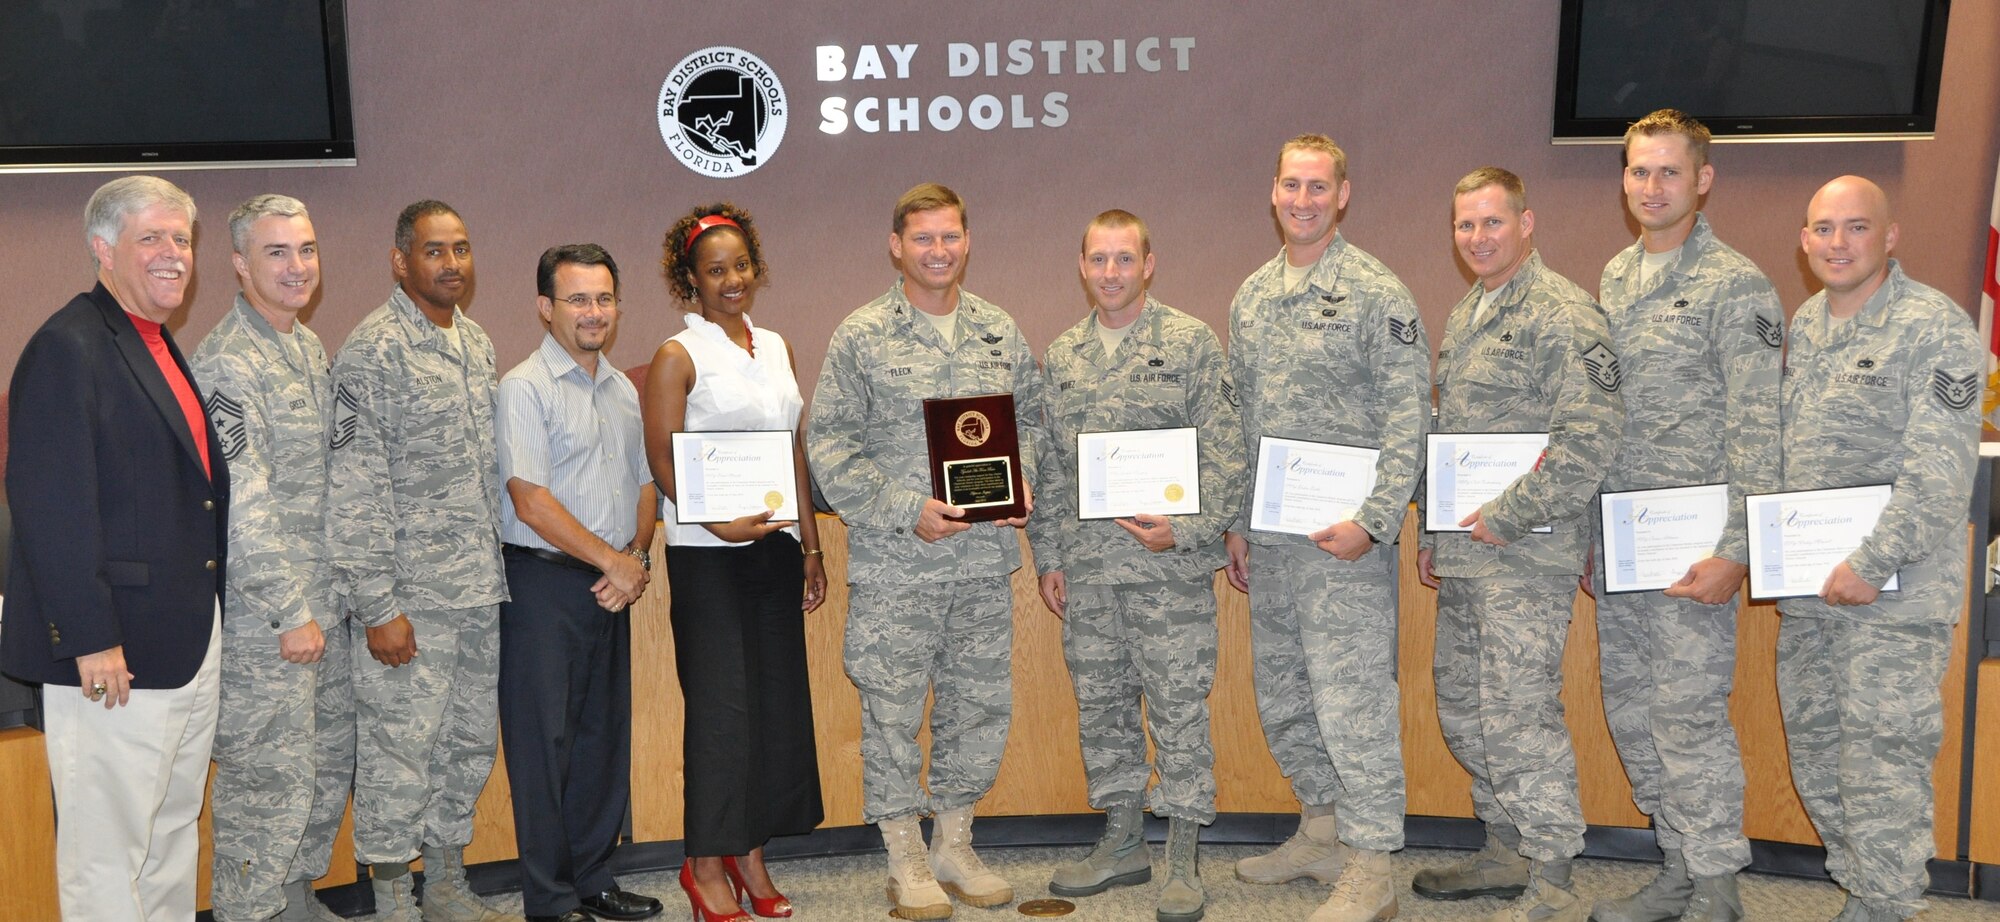 Tyndall Air Force Base members pose with their certification of appreciation for their involvement in the Bay County School Mentor Program June 10.  (U.S. Air Force photo by Senior Airman Anthony J. Hyatt)